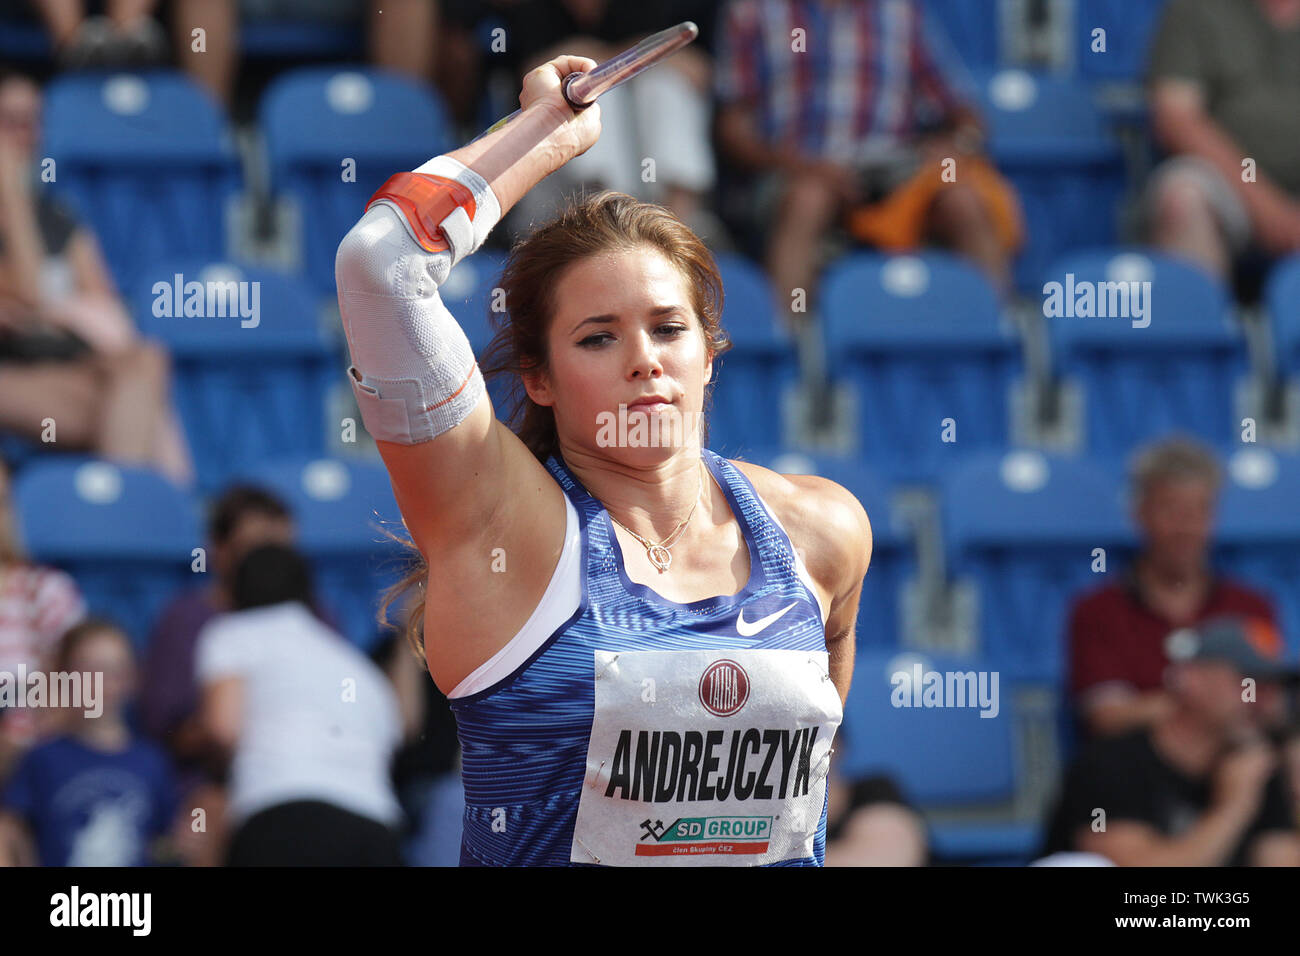 Maria Andrejczyk (Poland) competes in javelin throw during the Ostrava Golden Spike, an IAAF World Challenge athletic meeting, in Ostrava, Czech Repub Stock Photo